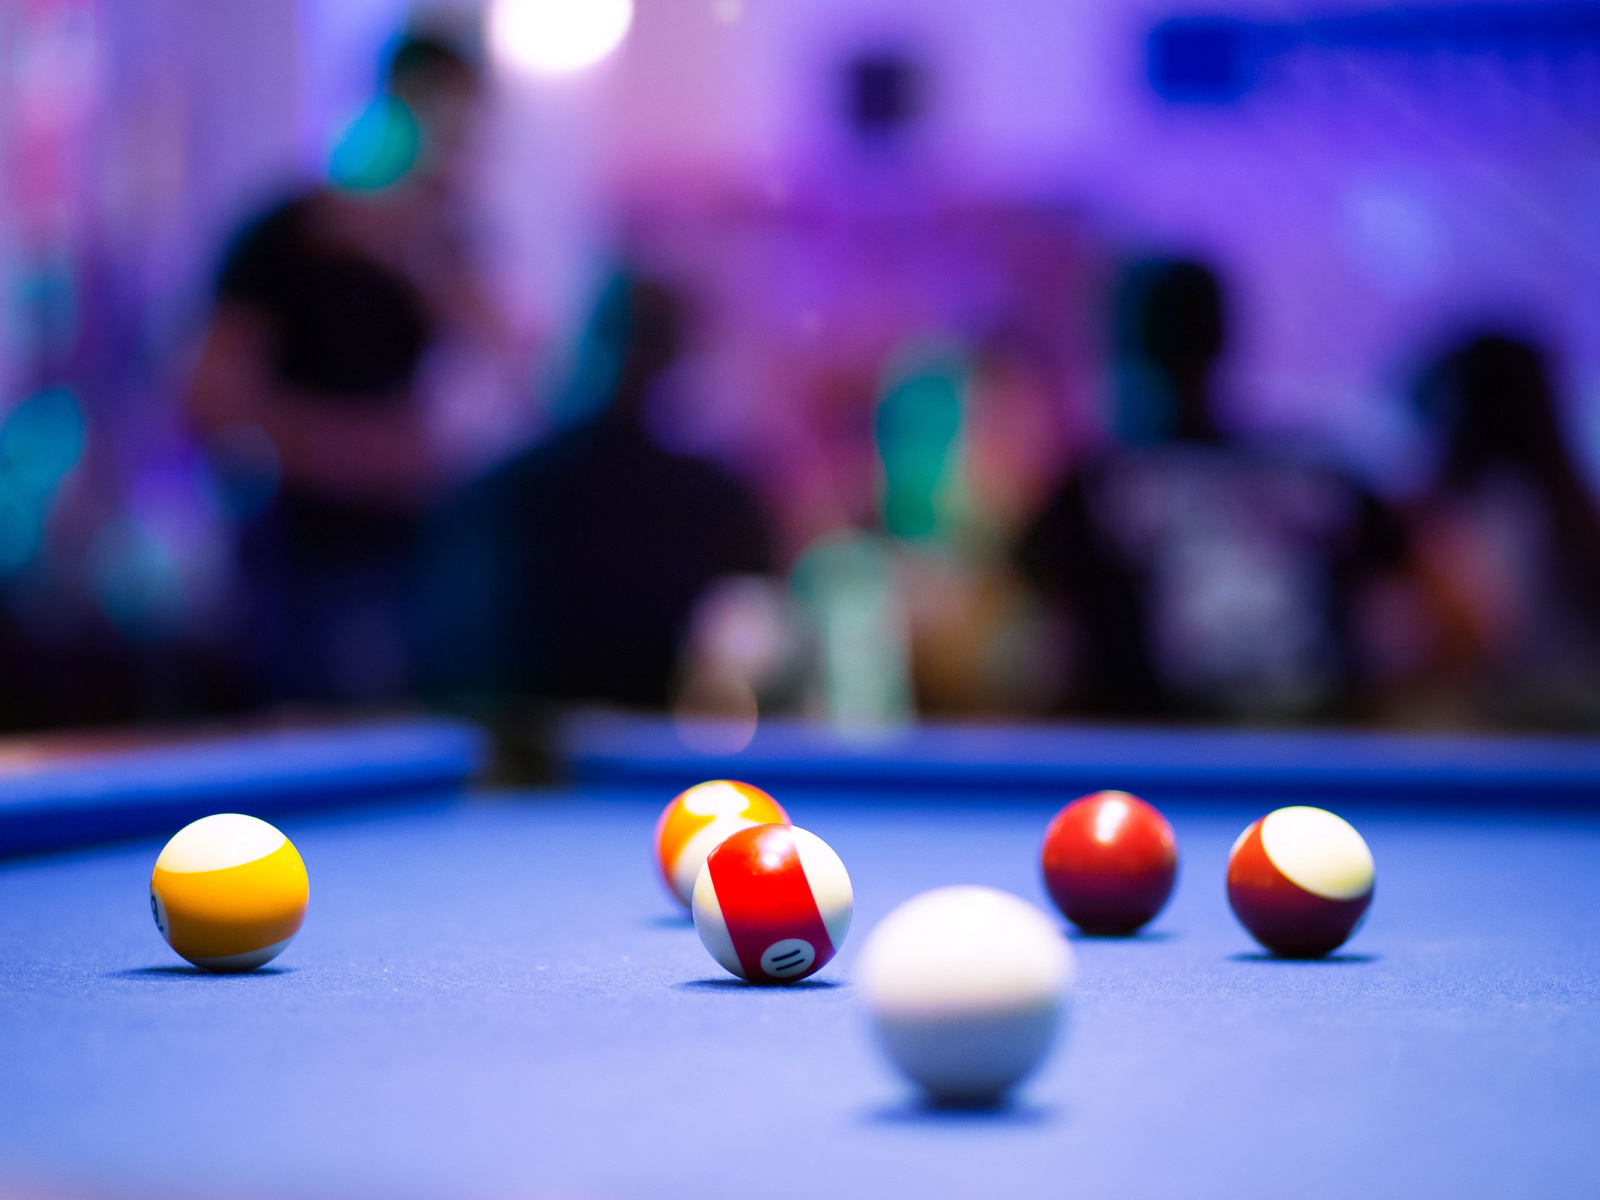 Rack Em’ Up for Fun at Lynnwood’s Pool and Billiards Lounge